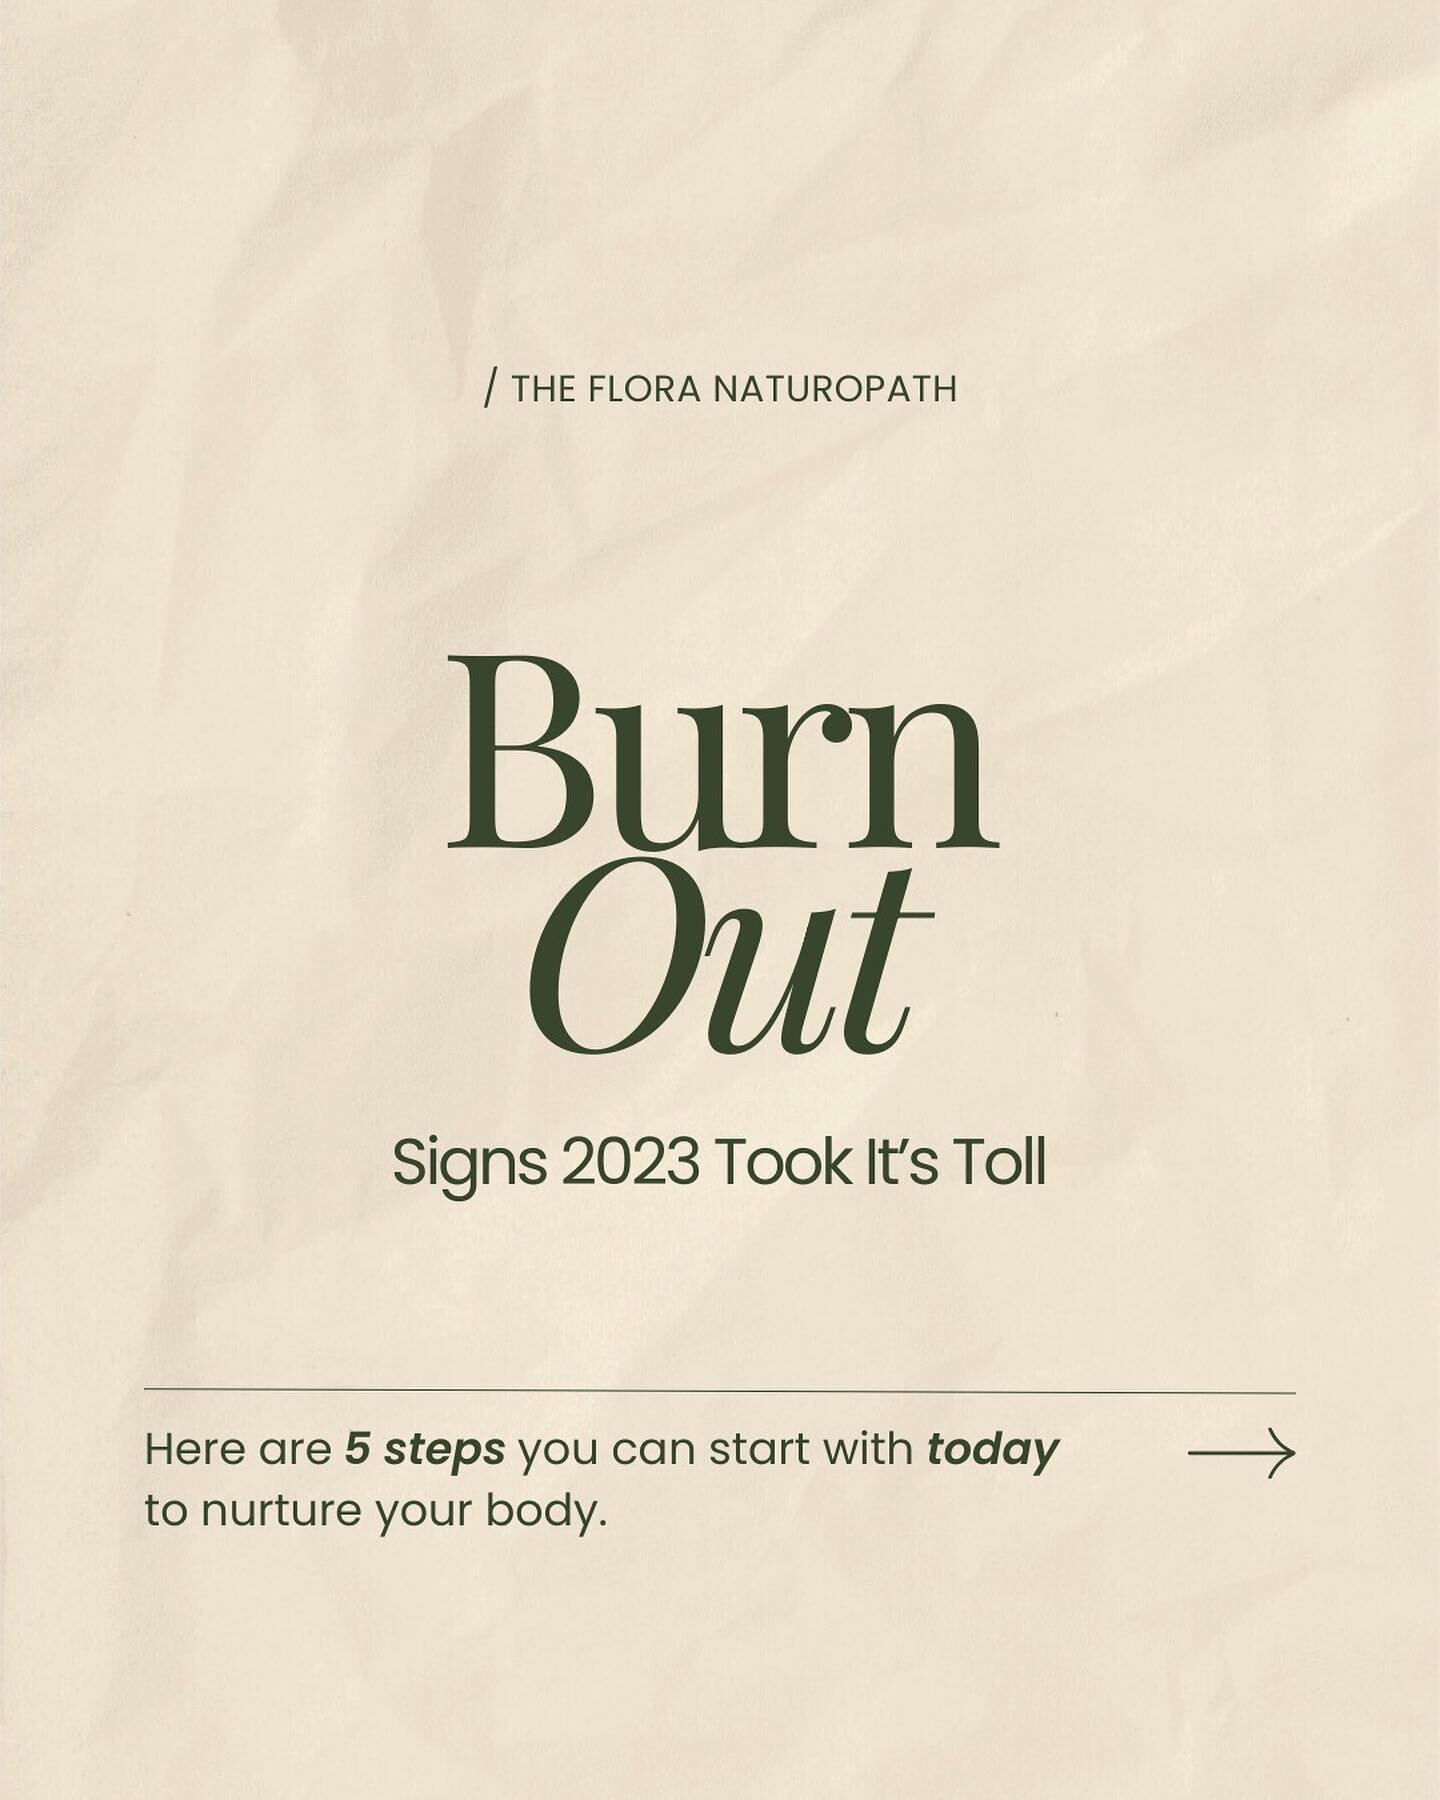 Are you feeling burnt out / stretched thin by 2023 and don&rsquo;t want to take that feeling into your new year?
.
Here&rsquo;s 5 tips to get you back on track to having better energy, a clearer head, improved sleep and feeling more like yourself.
.
